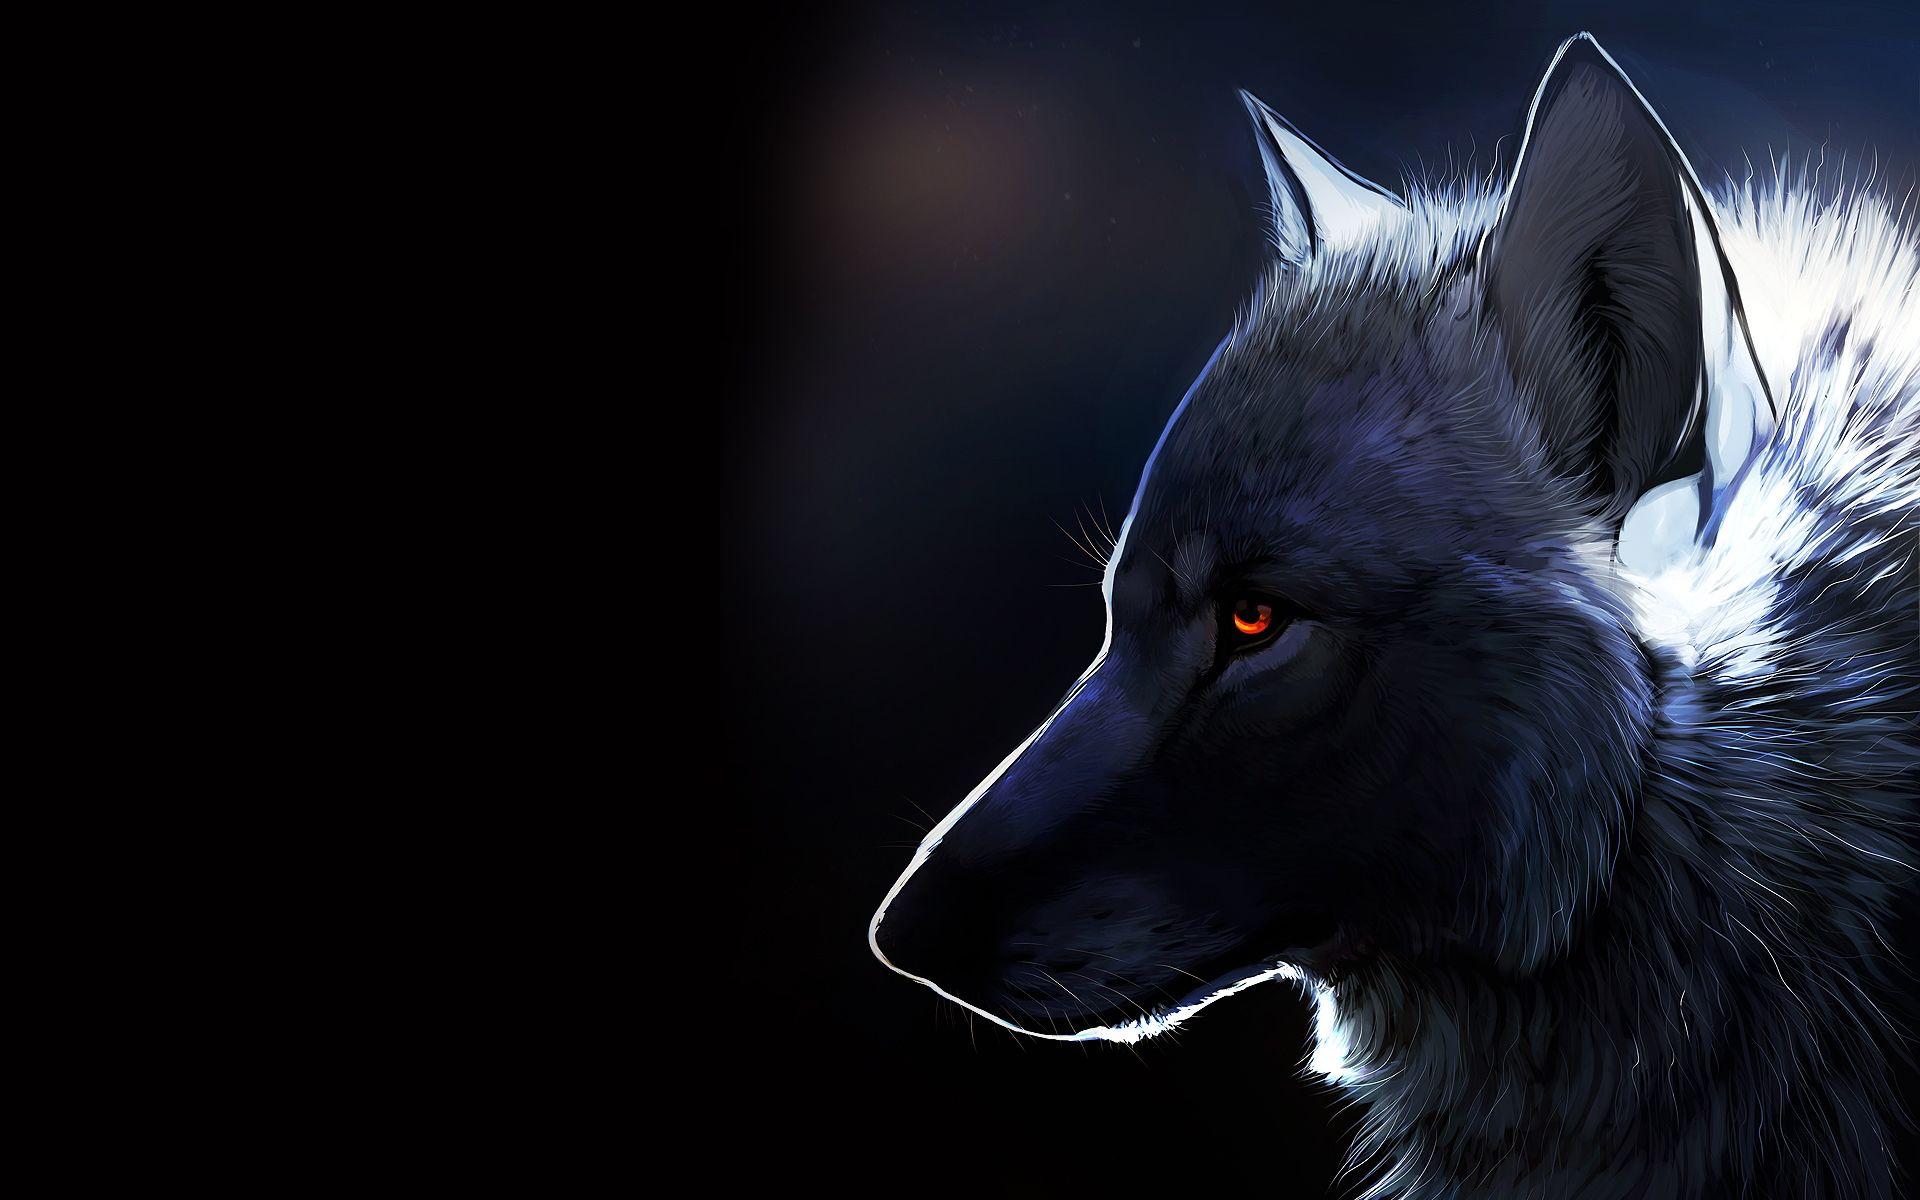 Related image. Artwork We All Enjoy. Wolf and Artwork